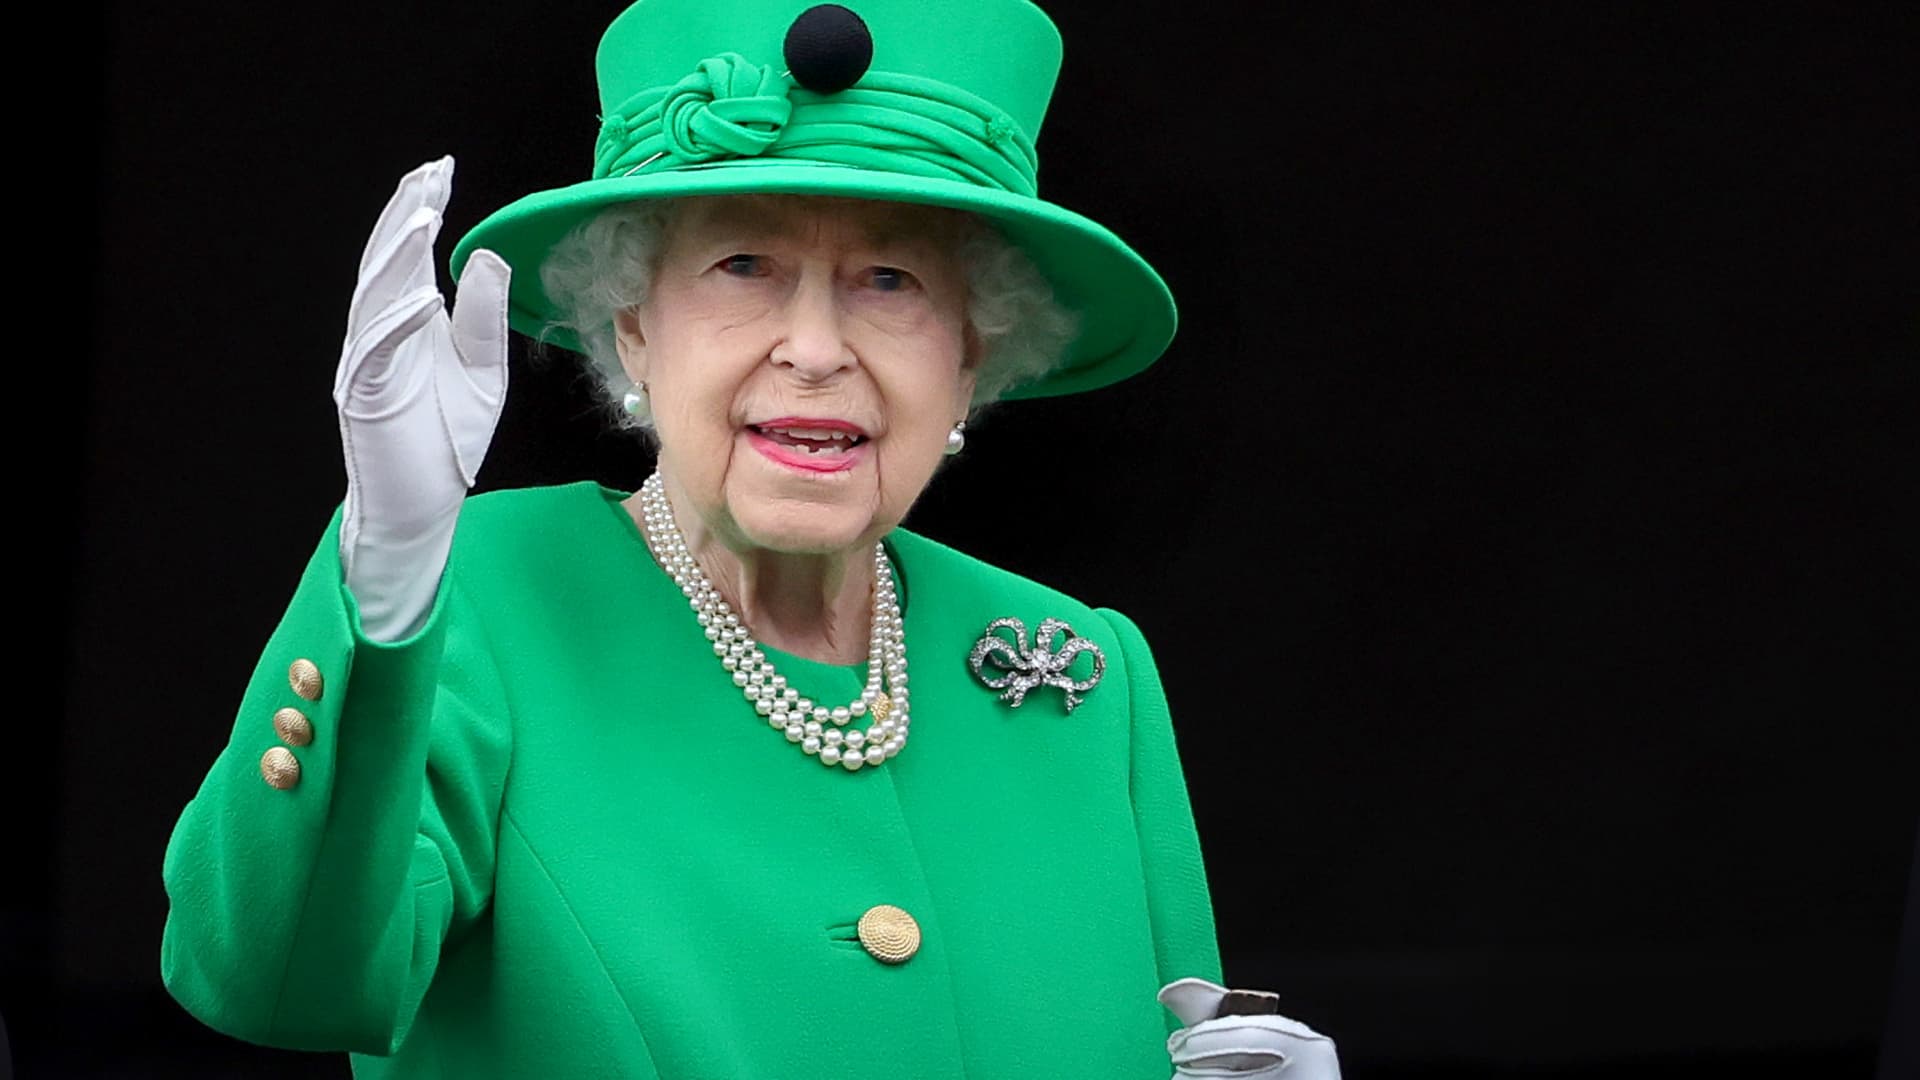 Photo of Corgis, castles and handbags: What happens to Queen’s wealth after her death?